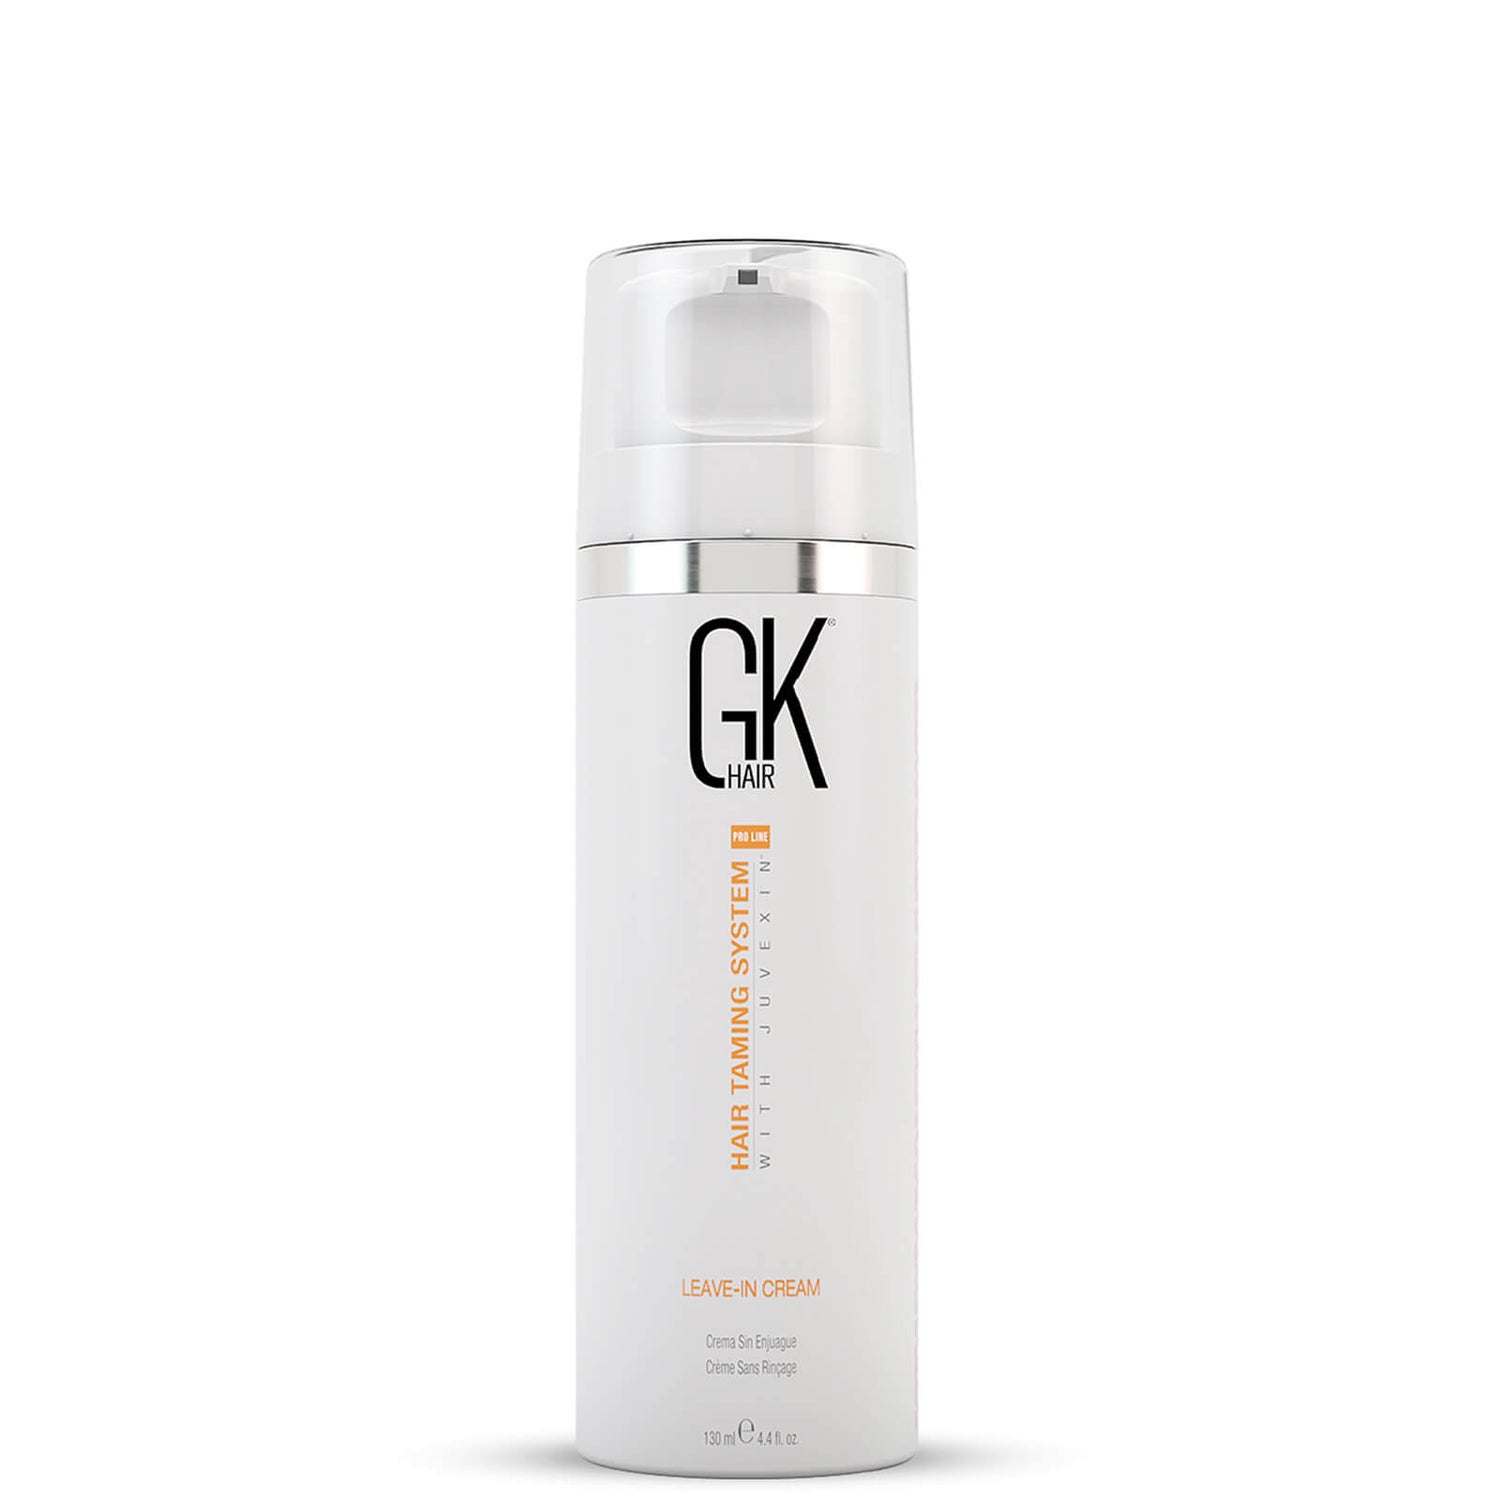 Review: “The Best” Treatment by GK Hair + VLOG – Alana MKlein